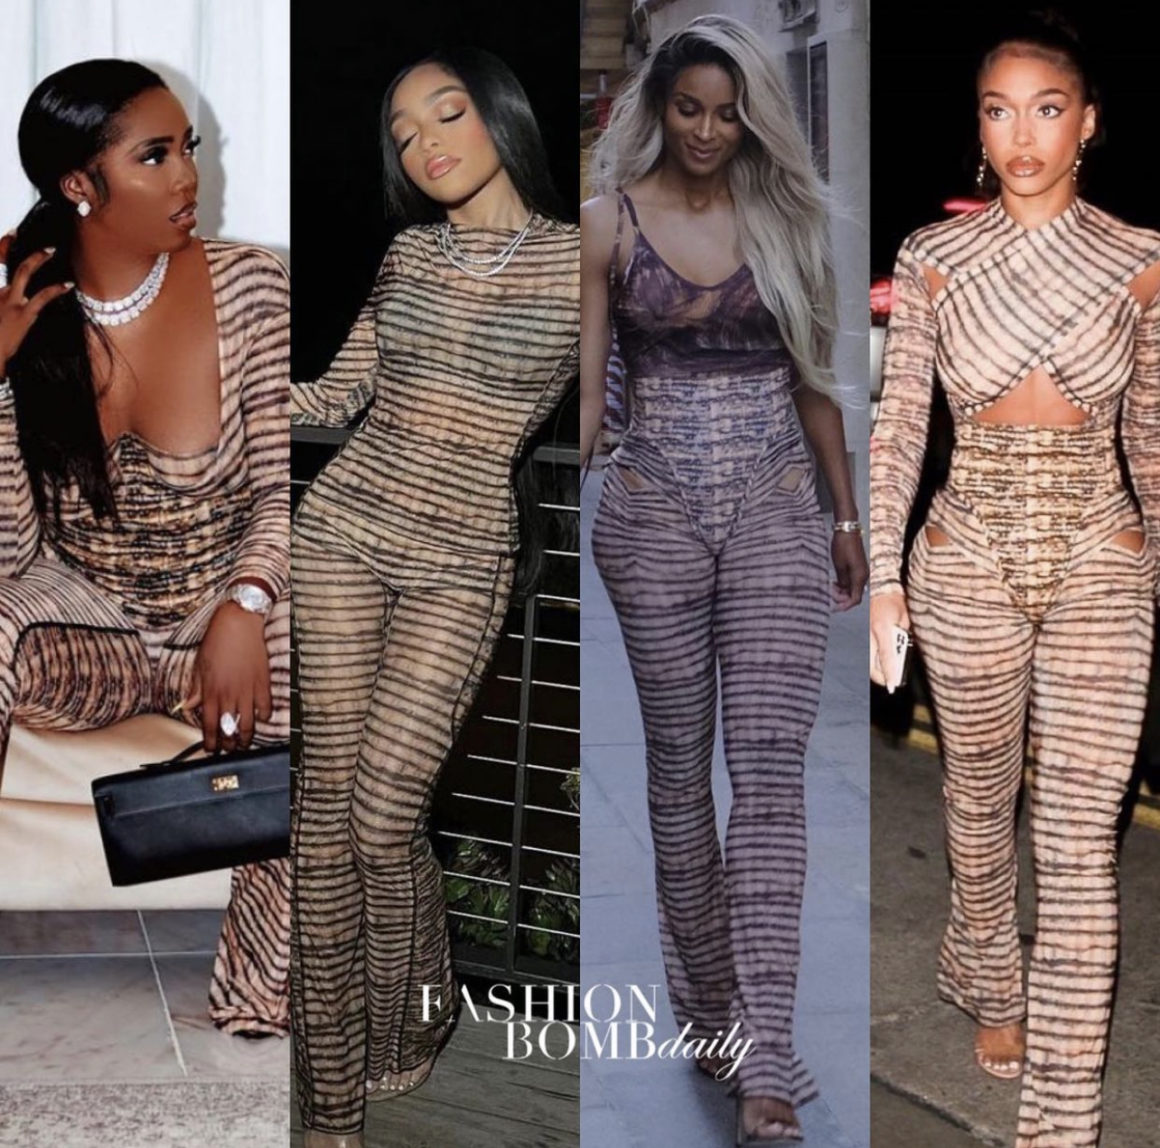 Celebs Love: Tiwa Savage, Jodie Woods, Ciara and Lori Harvey Spotted in  KNWLS by Charlotte Knowles Checked-Striped Tops and Pants, The Fashion  Bomb Blog